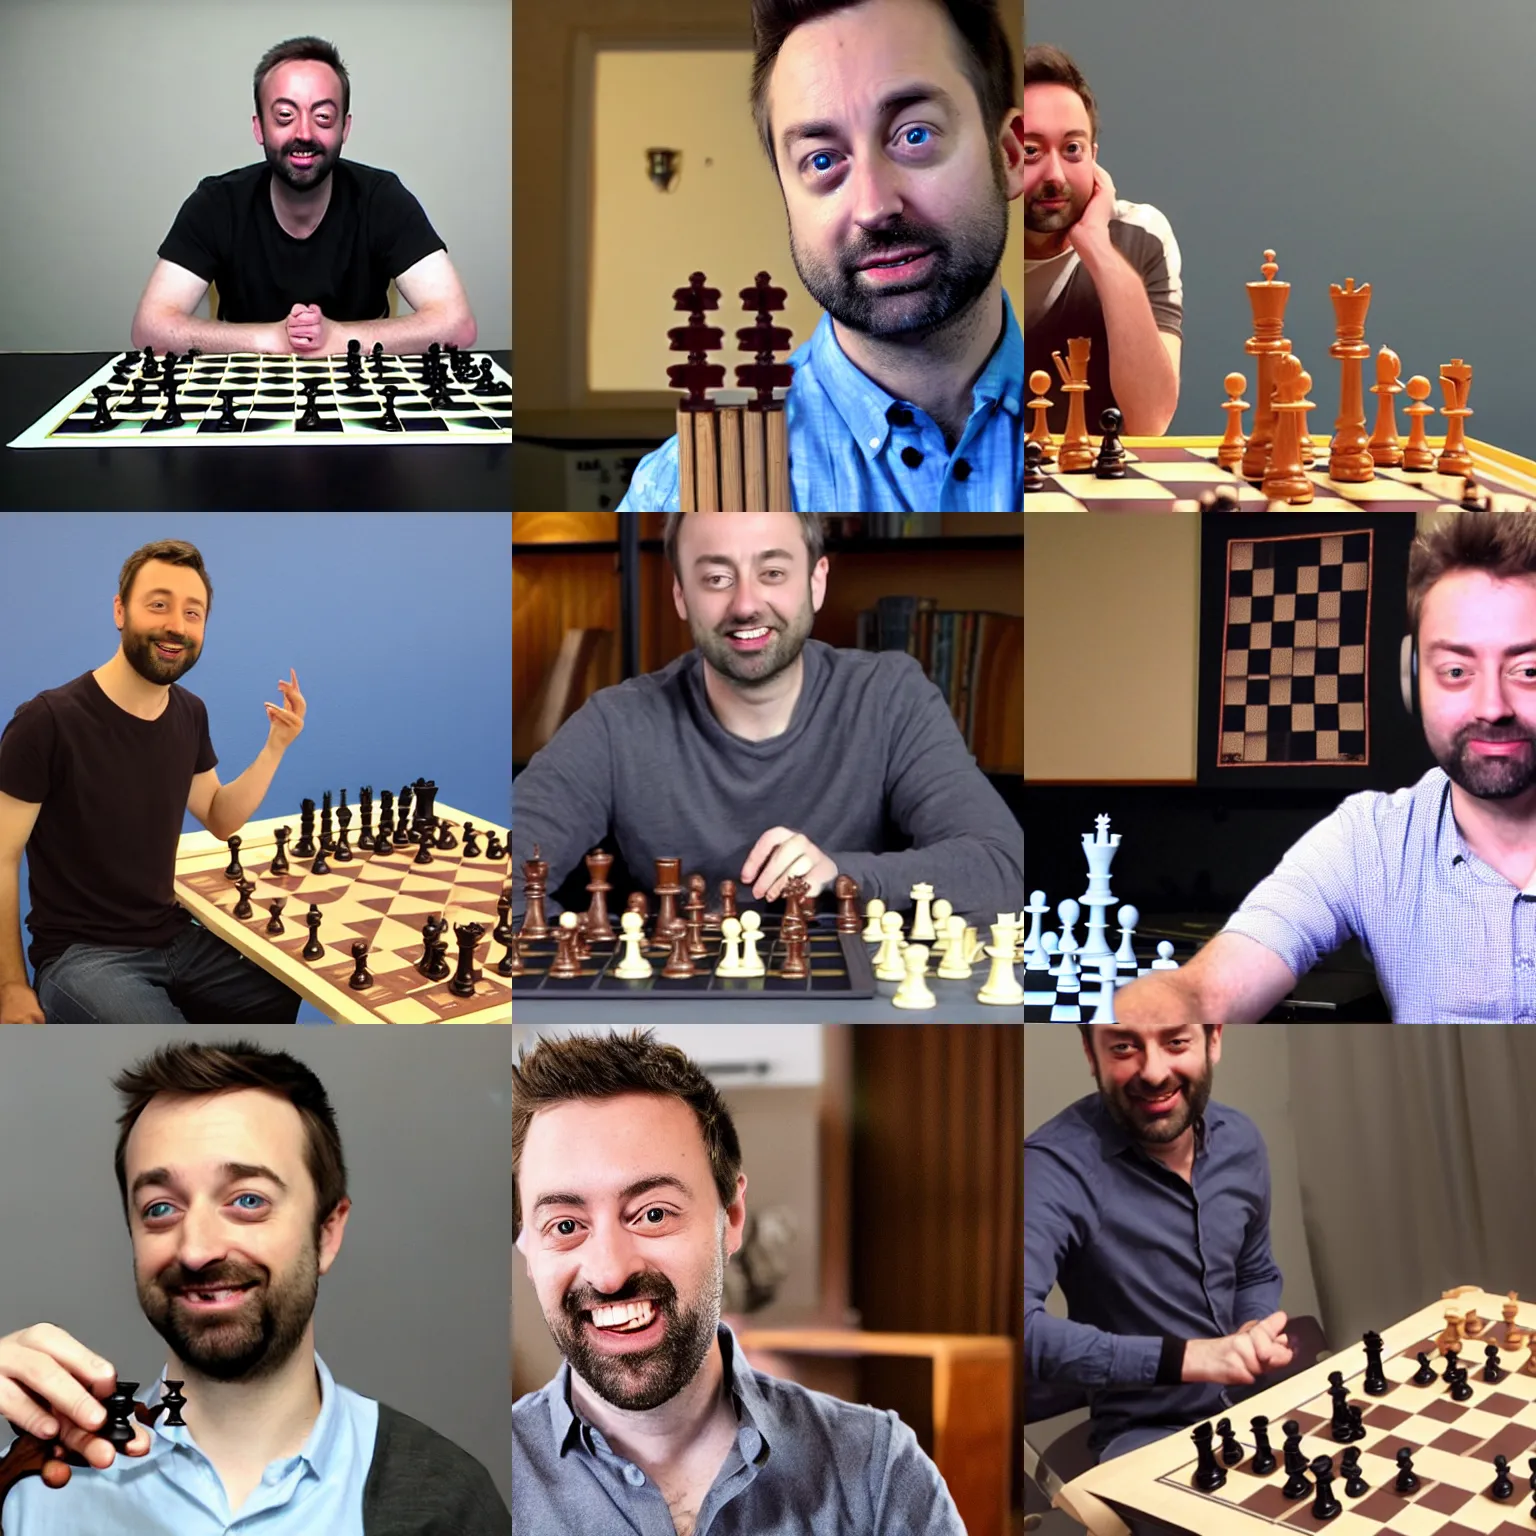 Prompt: derek from veritasium challenges you to a game of chess